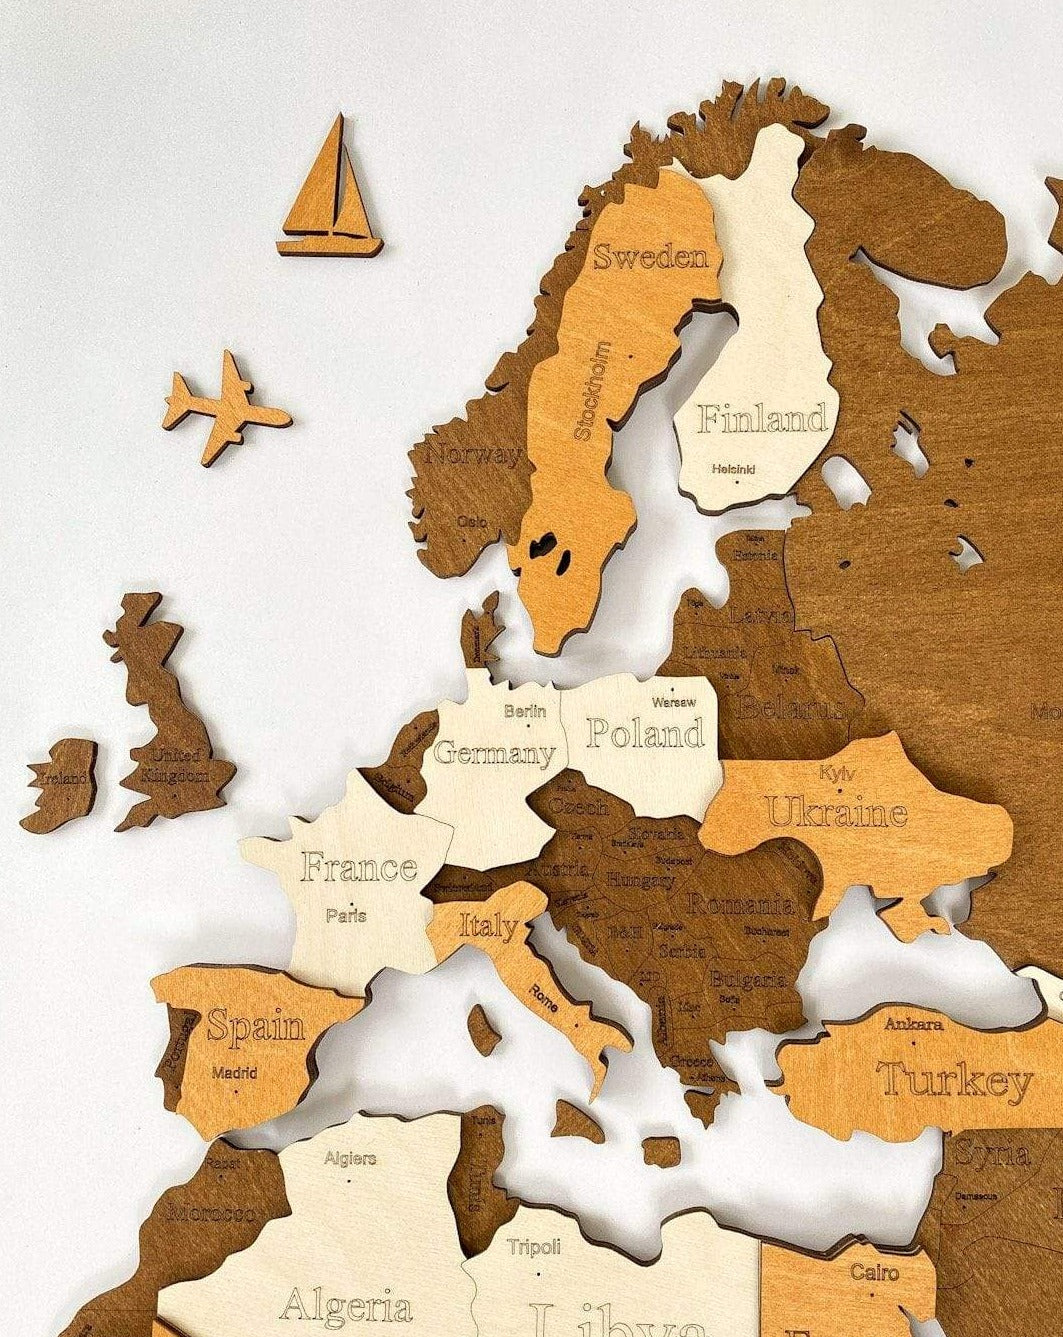 3D WOODEN WALL MAP IN BROWN COLORS - WoodLeo